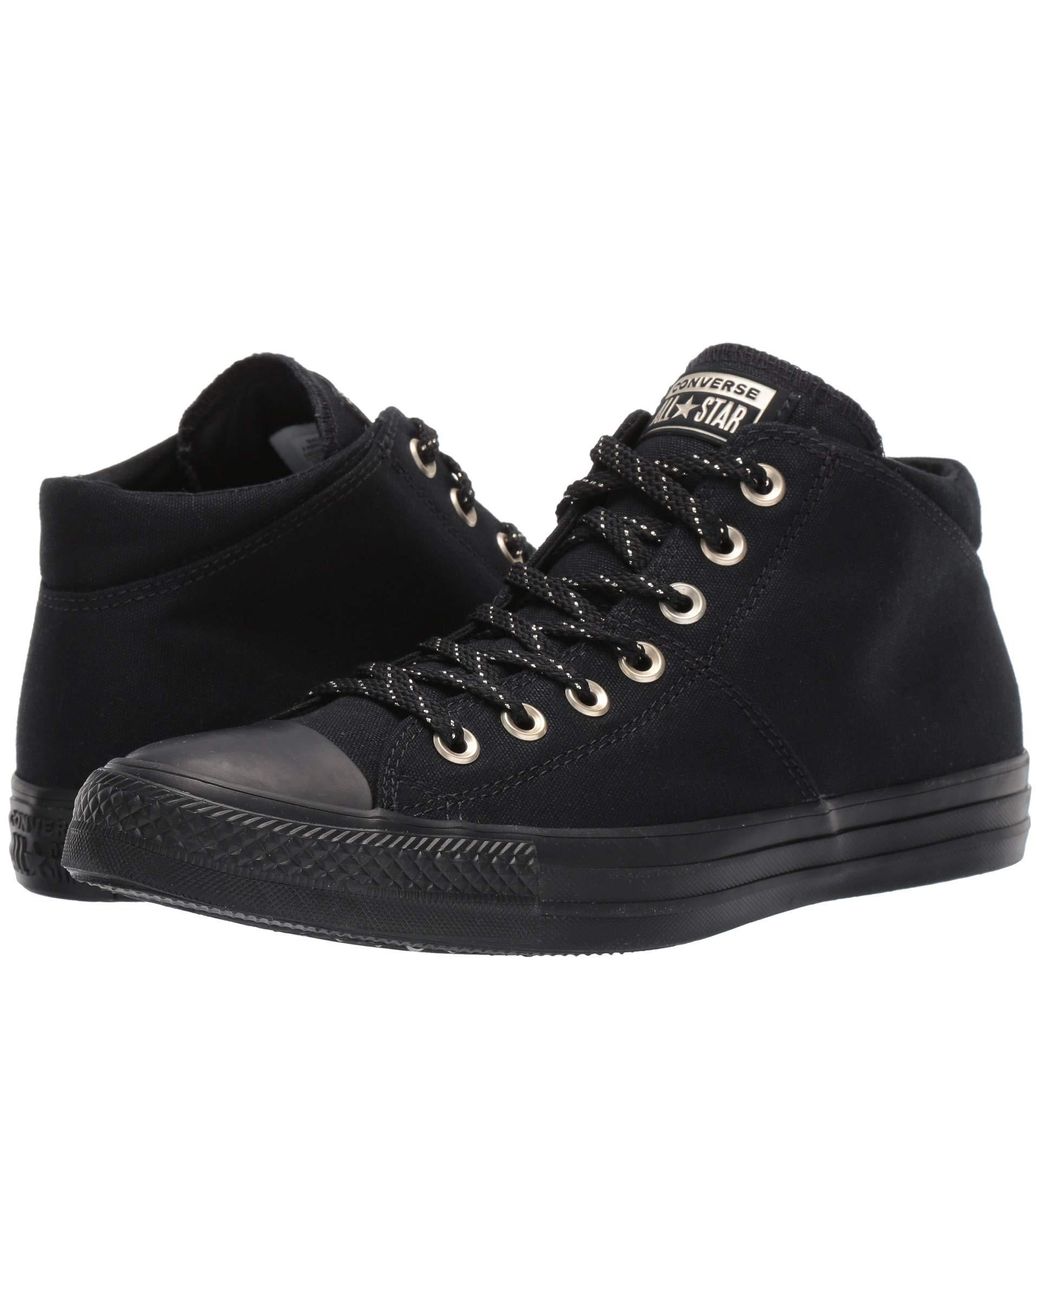 Converse Chuck Taylor All Star Madison Final Frontier - Mid in Black | Lyst